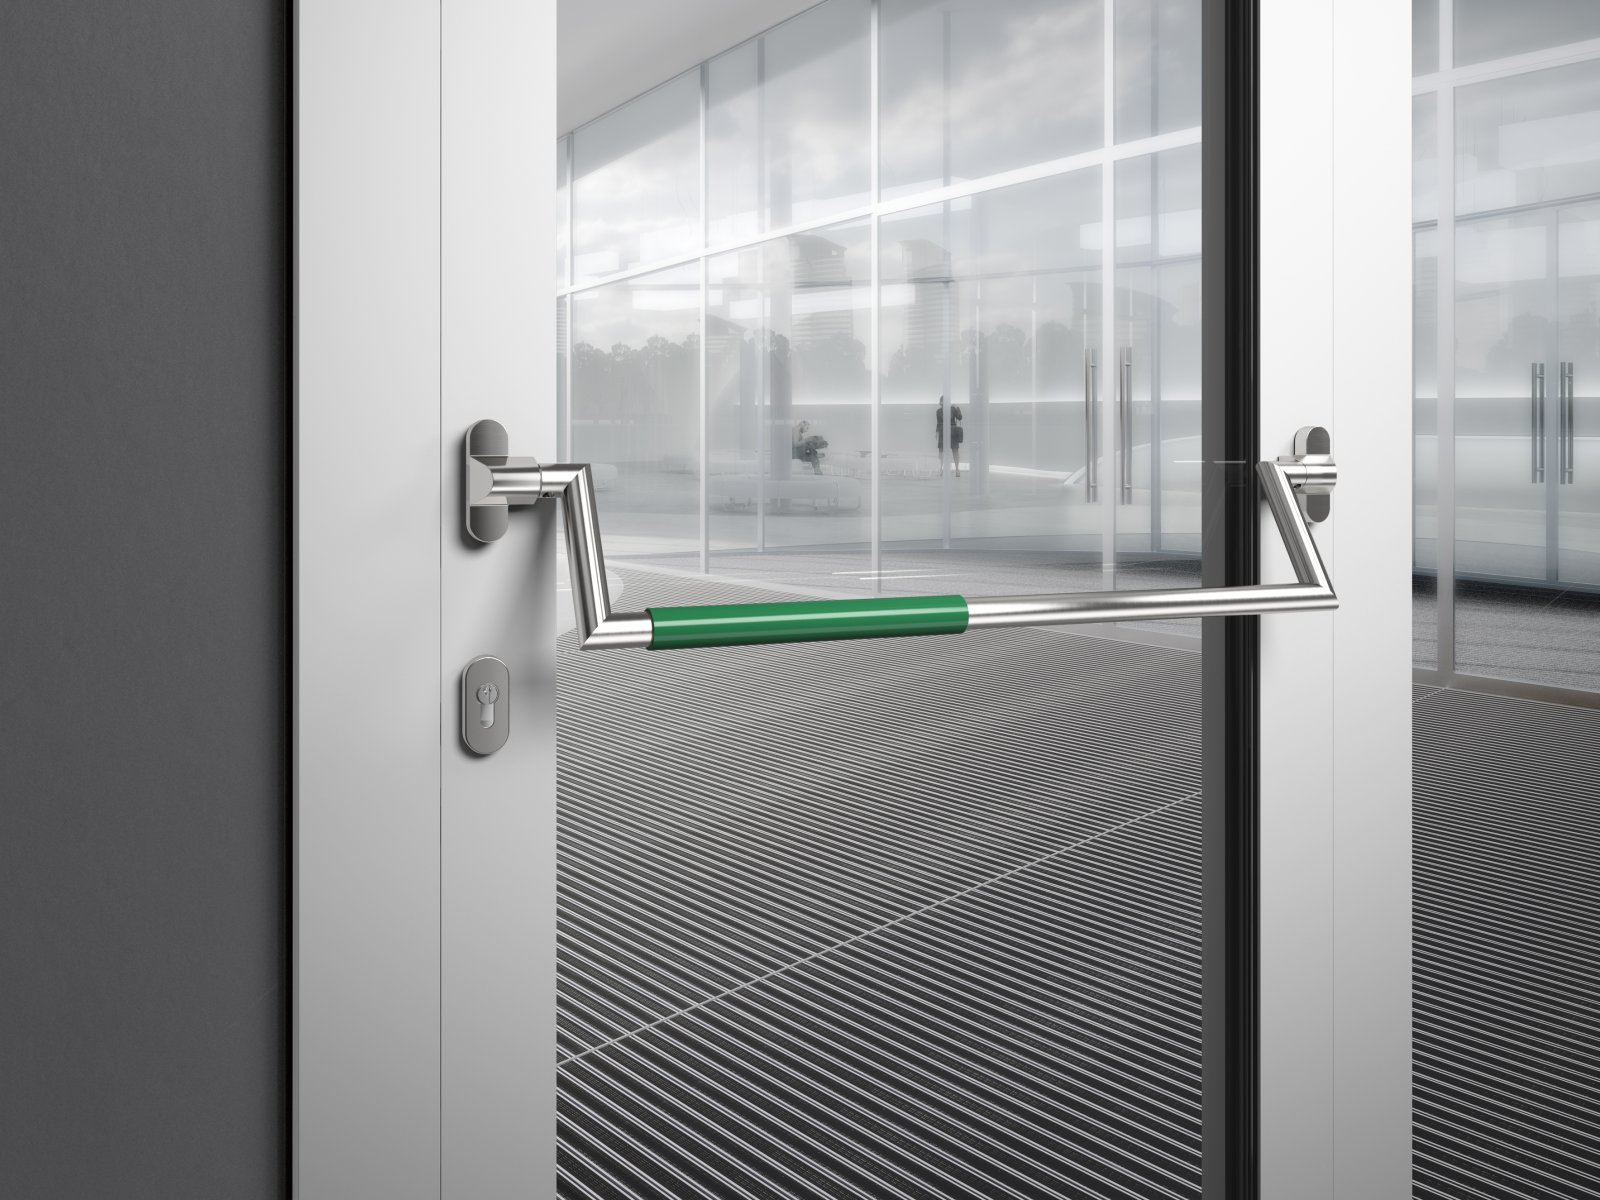 Panic bar on a public building door made of matt polished stainless steel with green polyamide handle tube